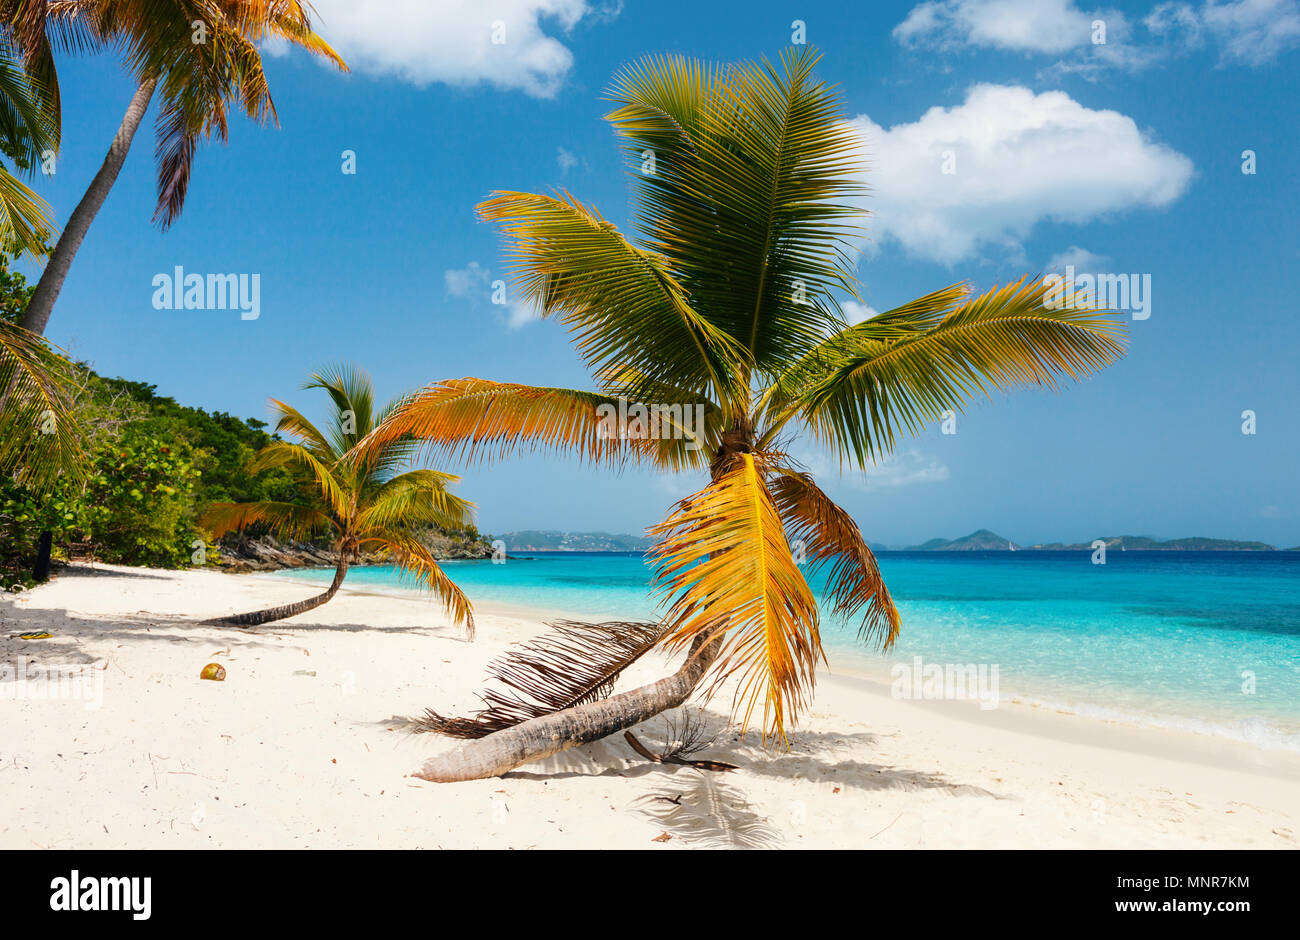 Beautiful tropical beach with palm trees, white sand, turquoise ocean water and blue sky on St John, US Virgin Islands in Caribbean Stock Photo